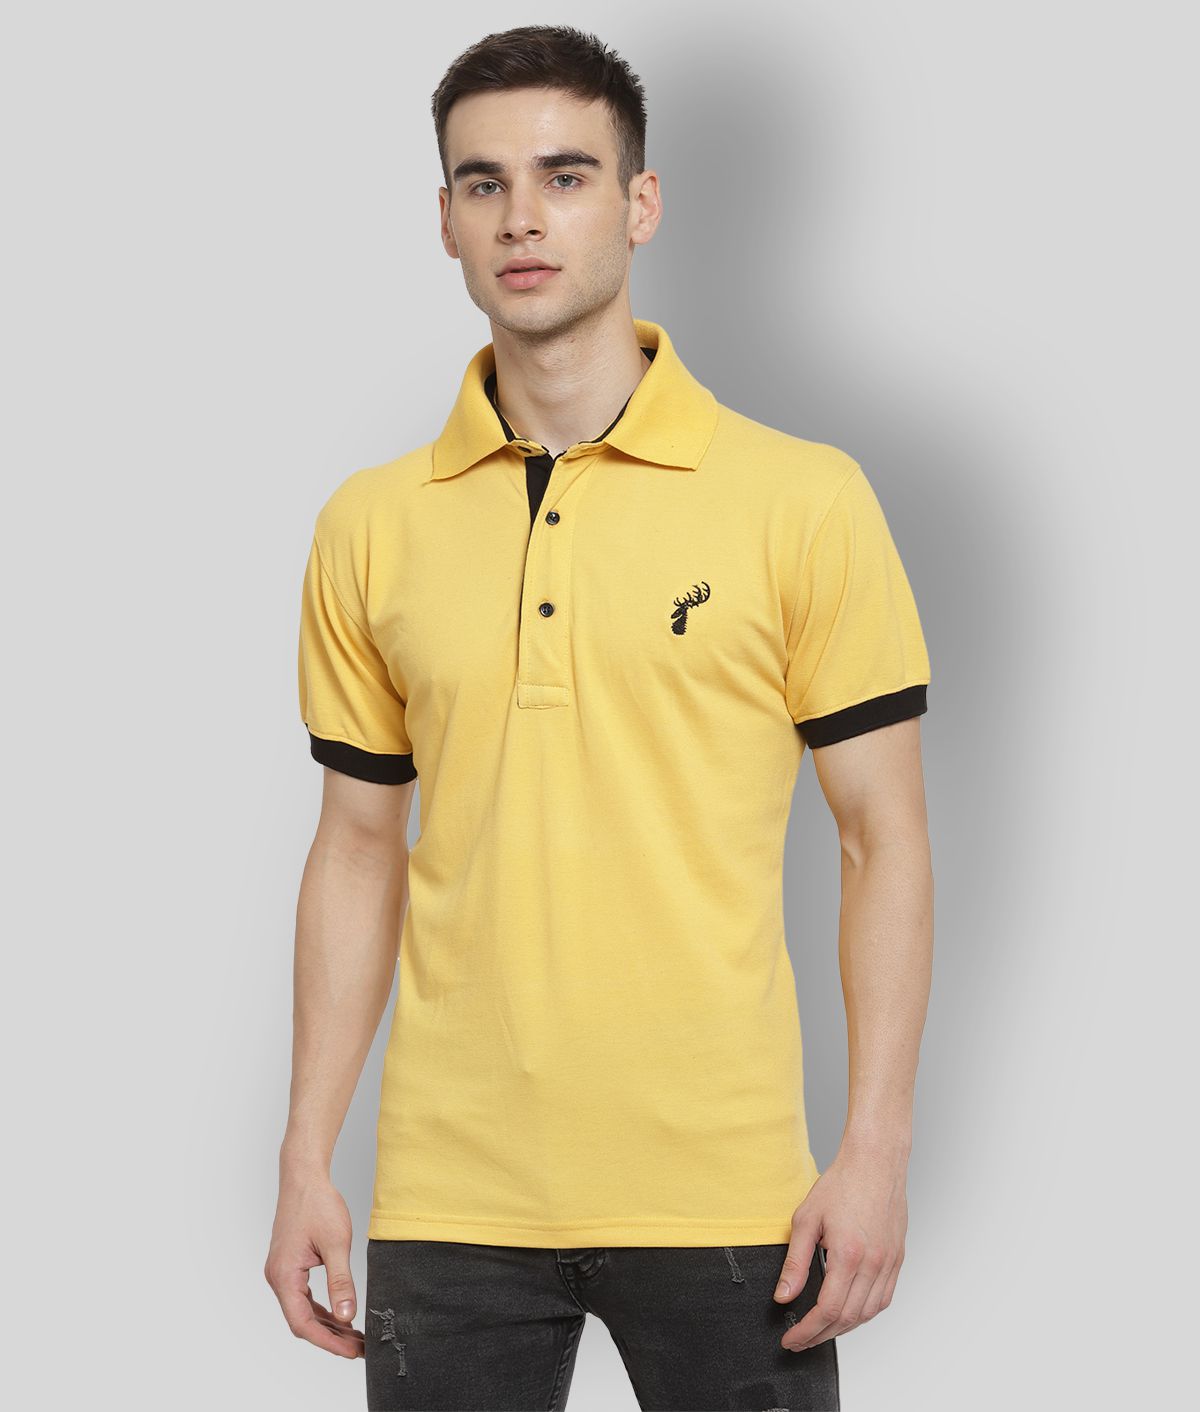     			Uzarus - Yellow Cotton Regular Fit Men's Sports Polo T-Shirt ( Pack of 1 )